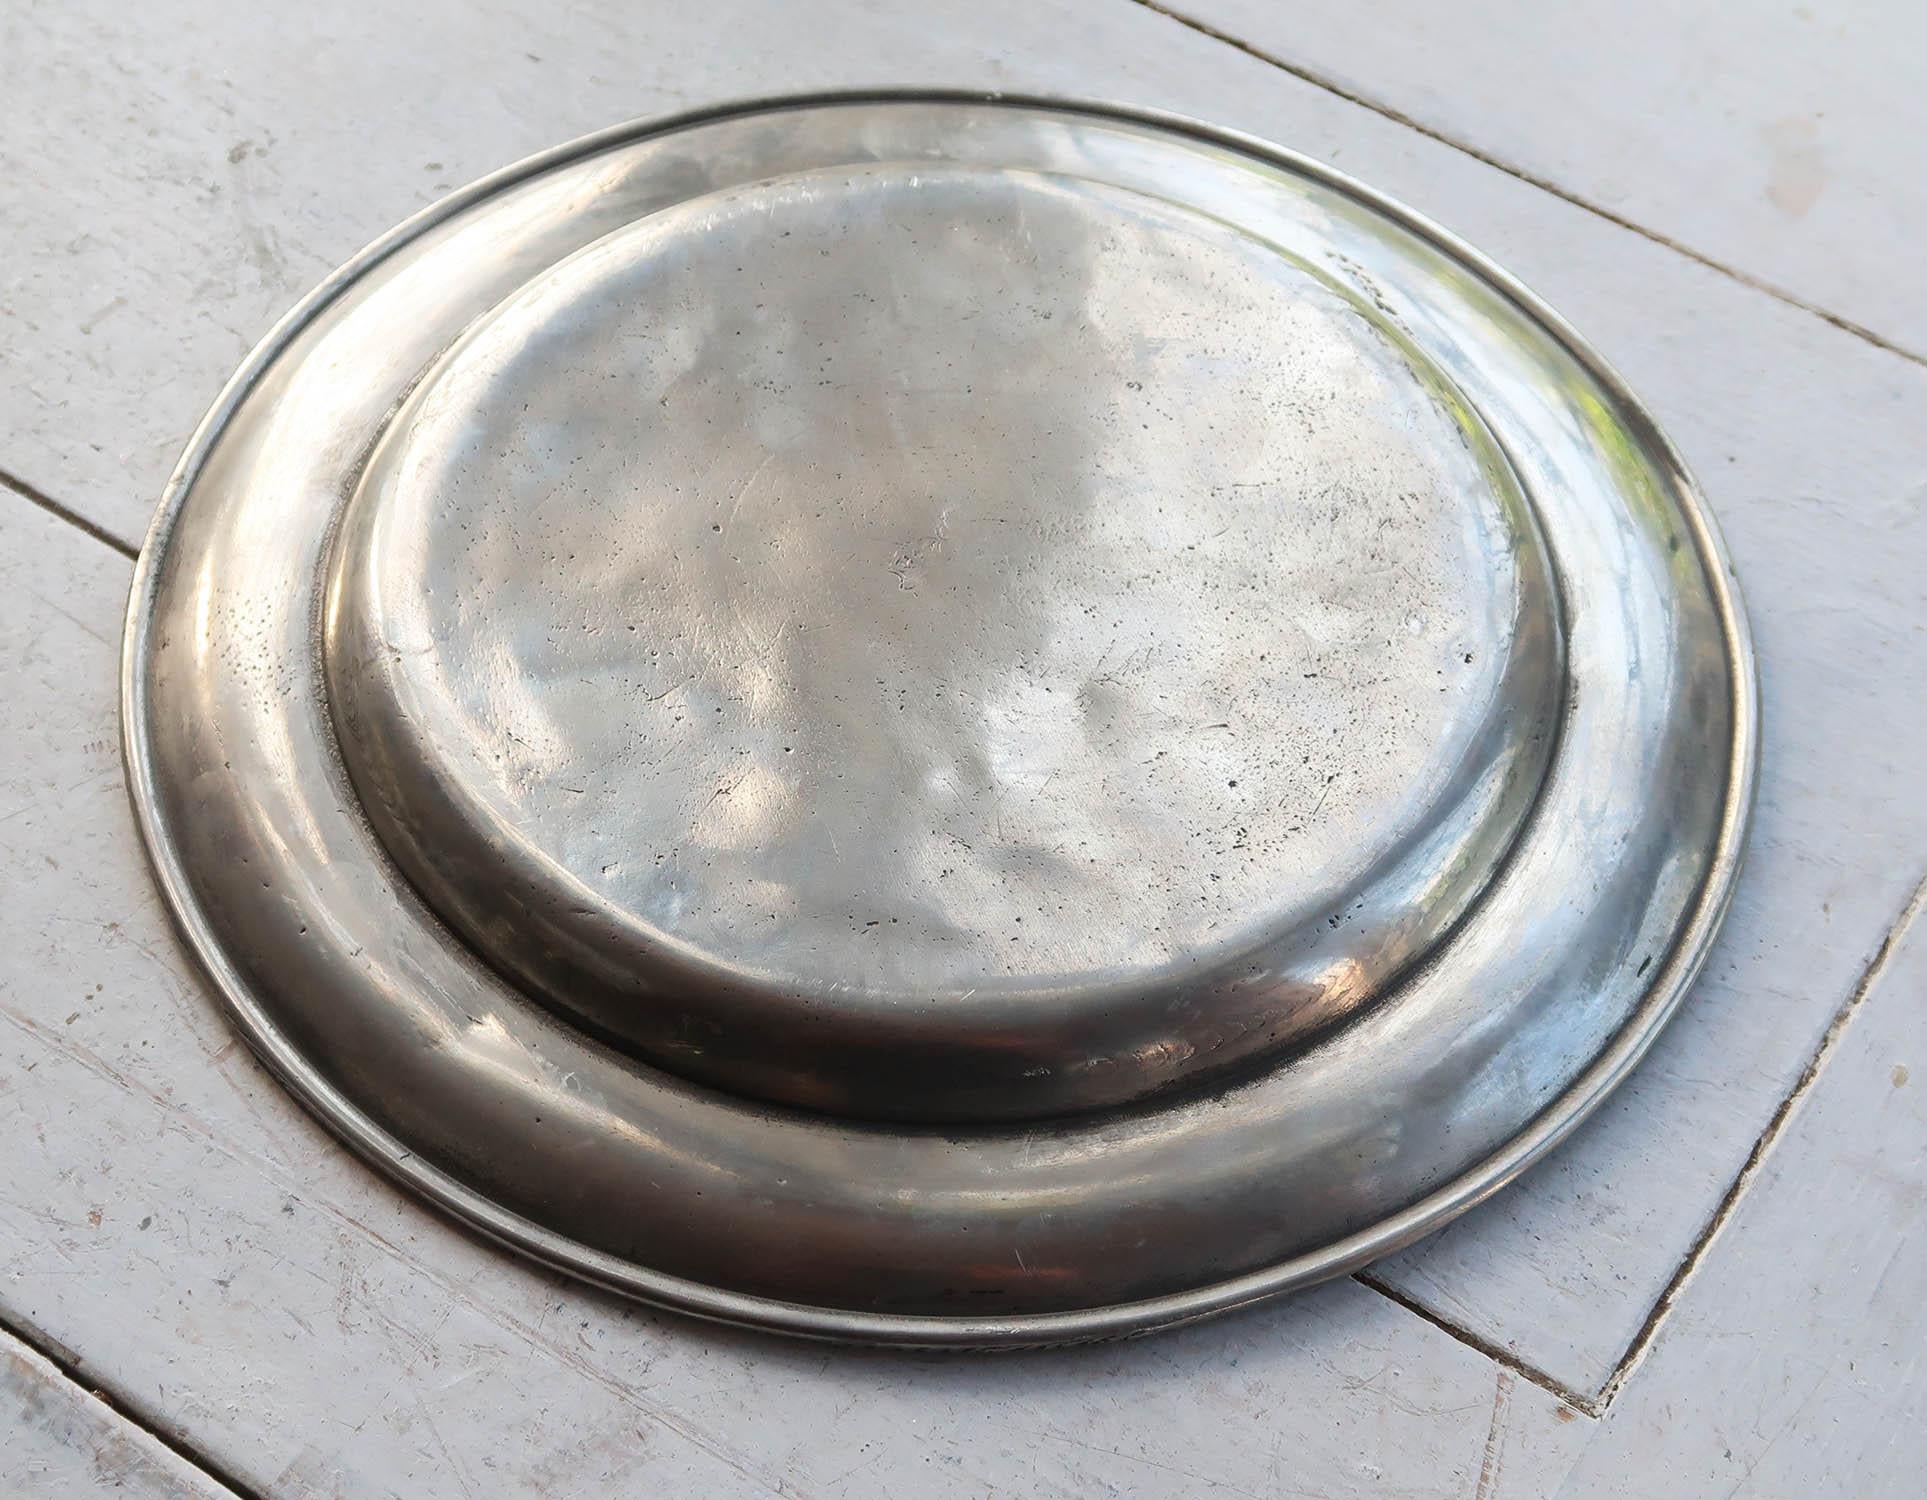 Georgian Antique Brightly Polished Pewter Plate, English, C.1800